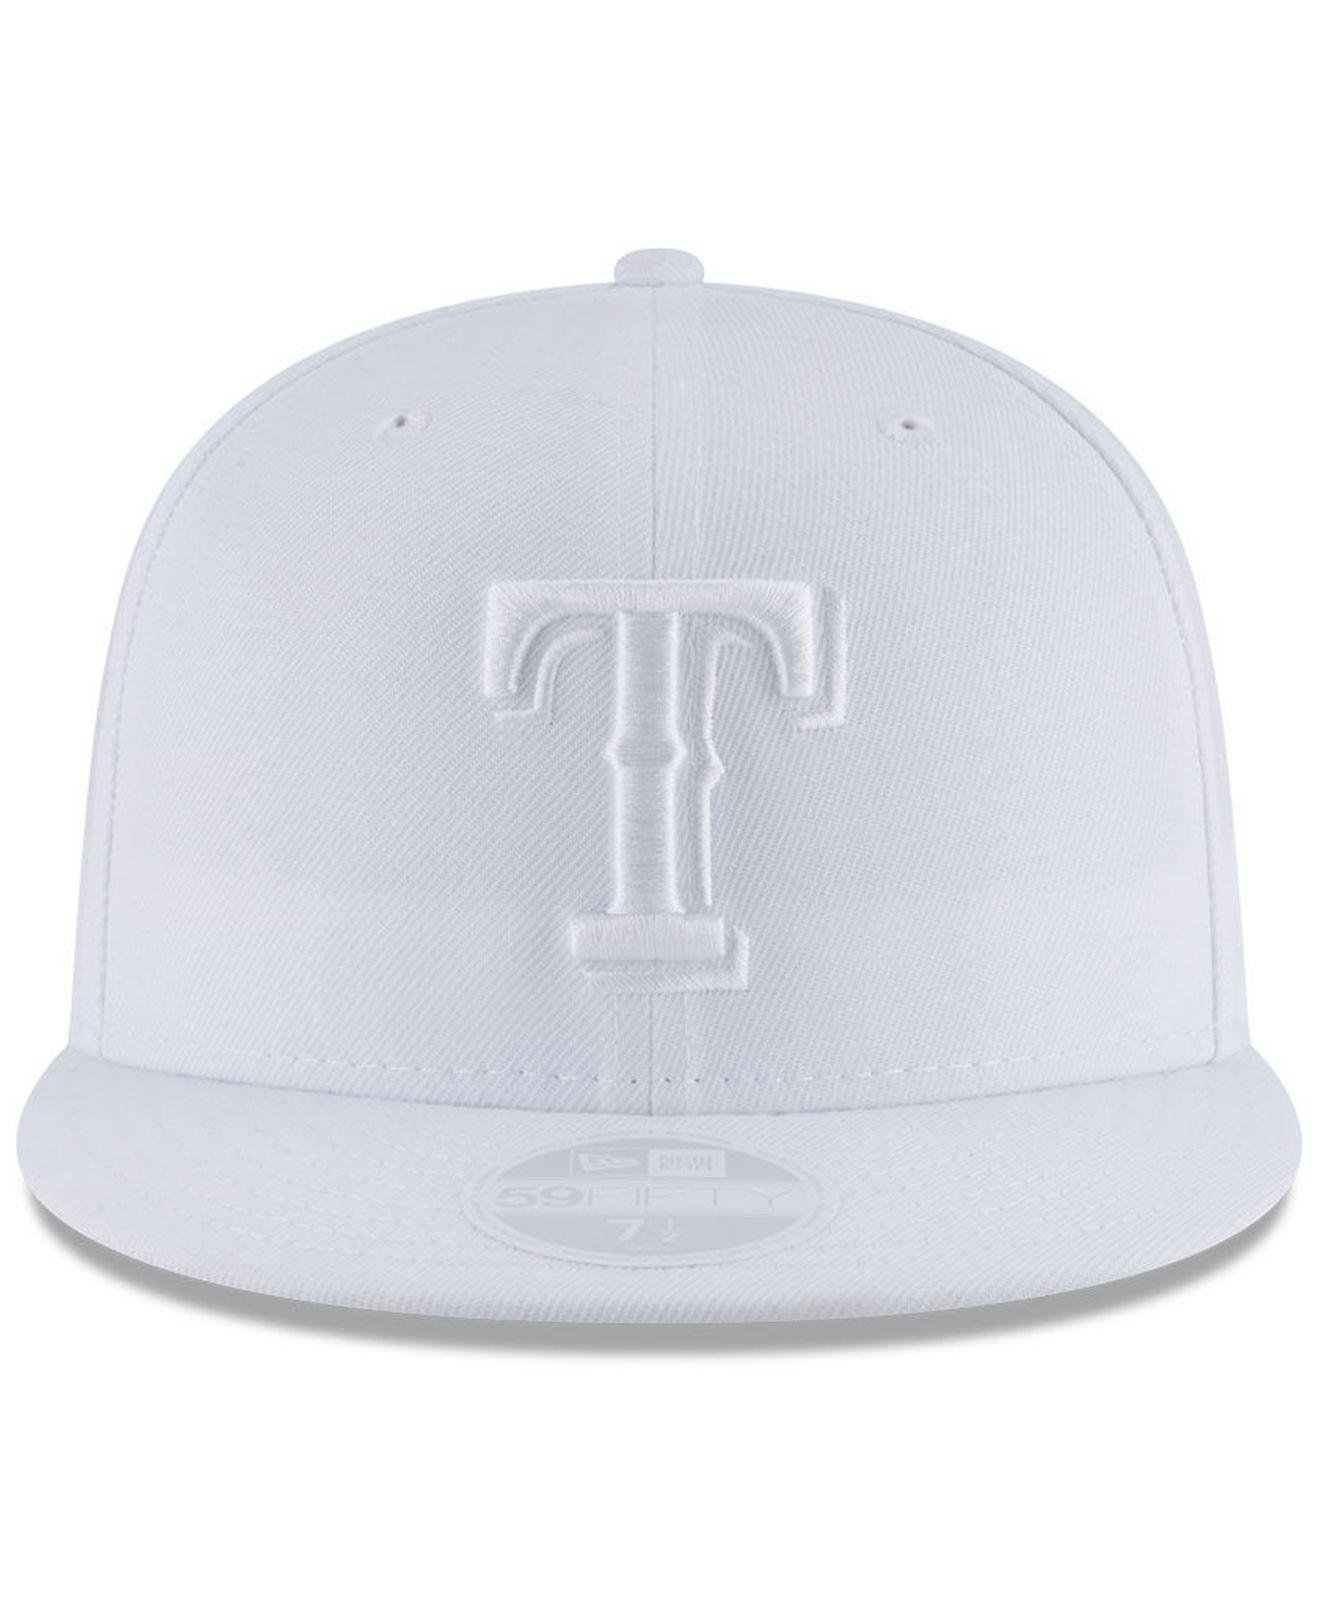 Texas Rangers New Era Optic 59FIFTY Fitted Hat - White/Royal